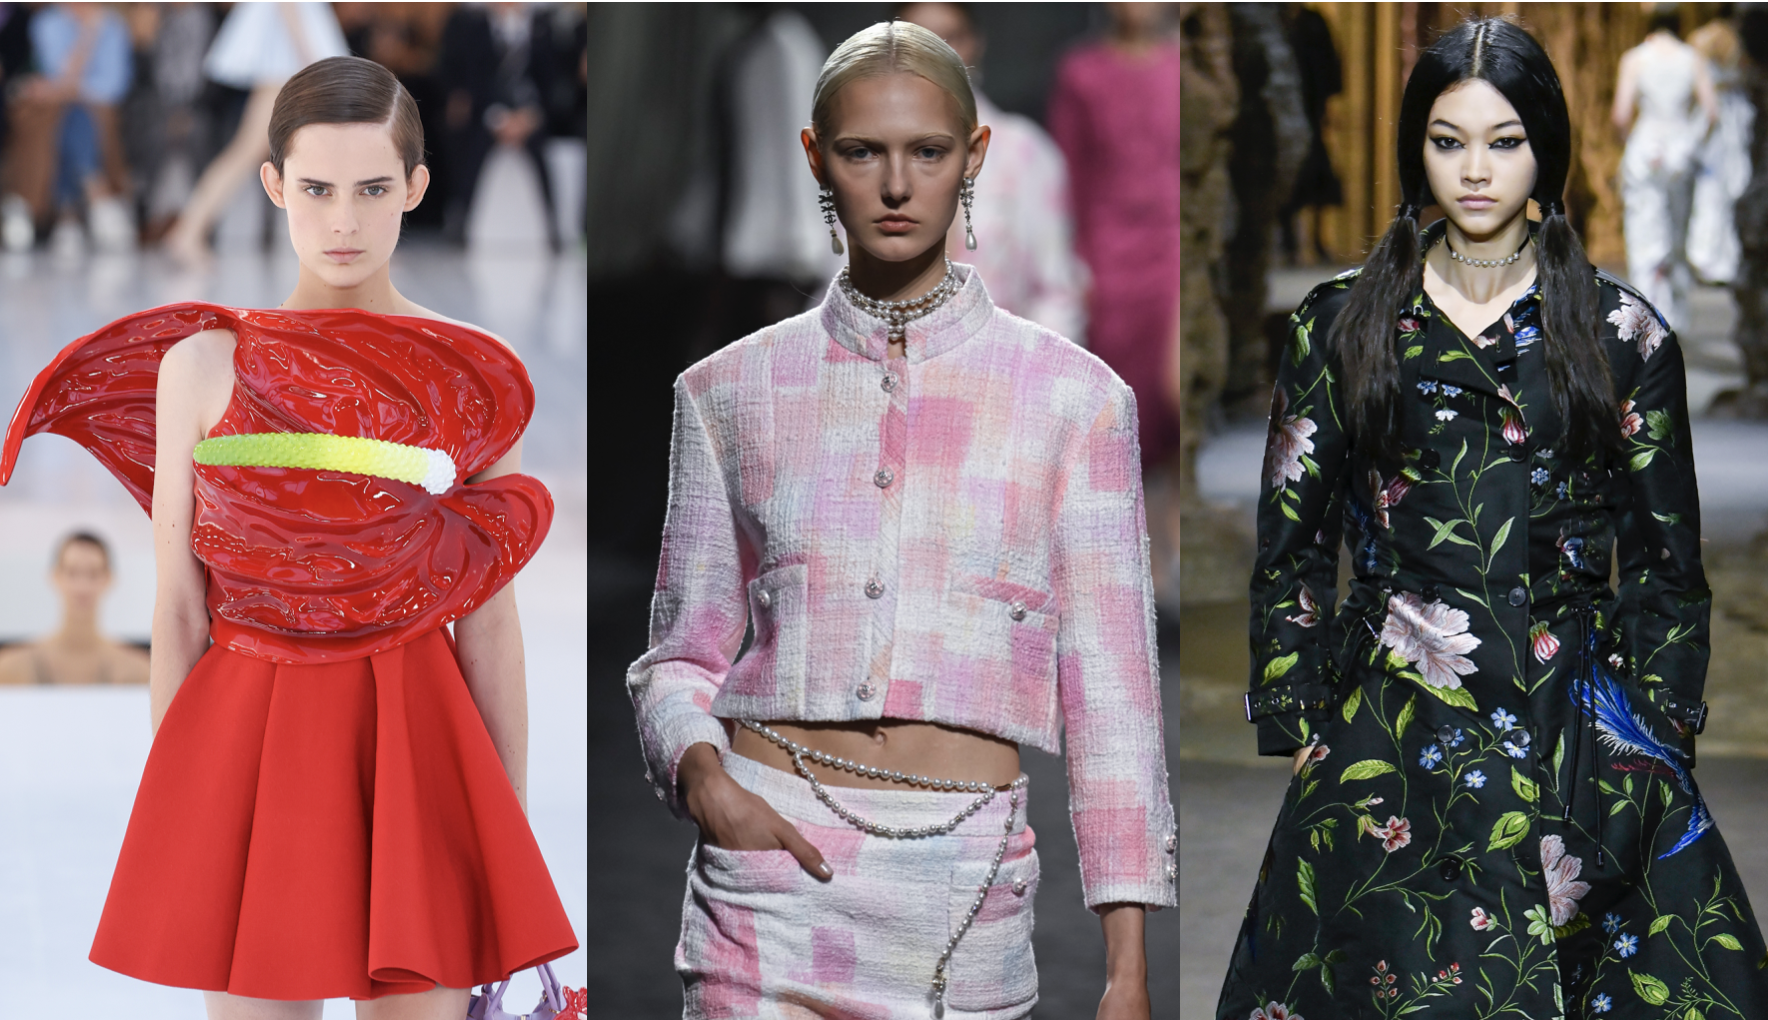 What Fashion Trends Has Spring 2023 in Store?